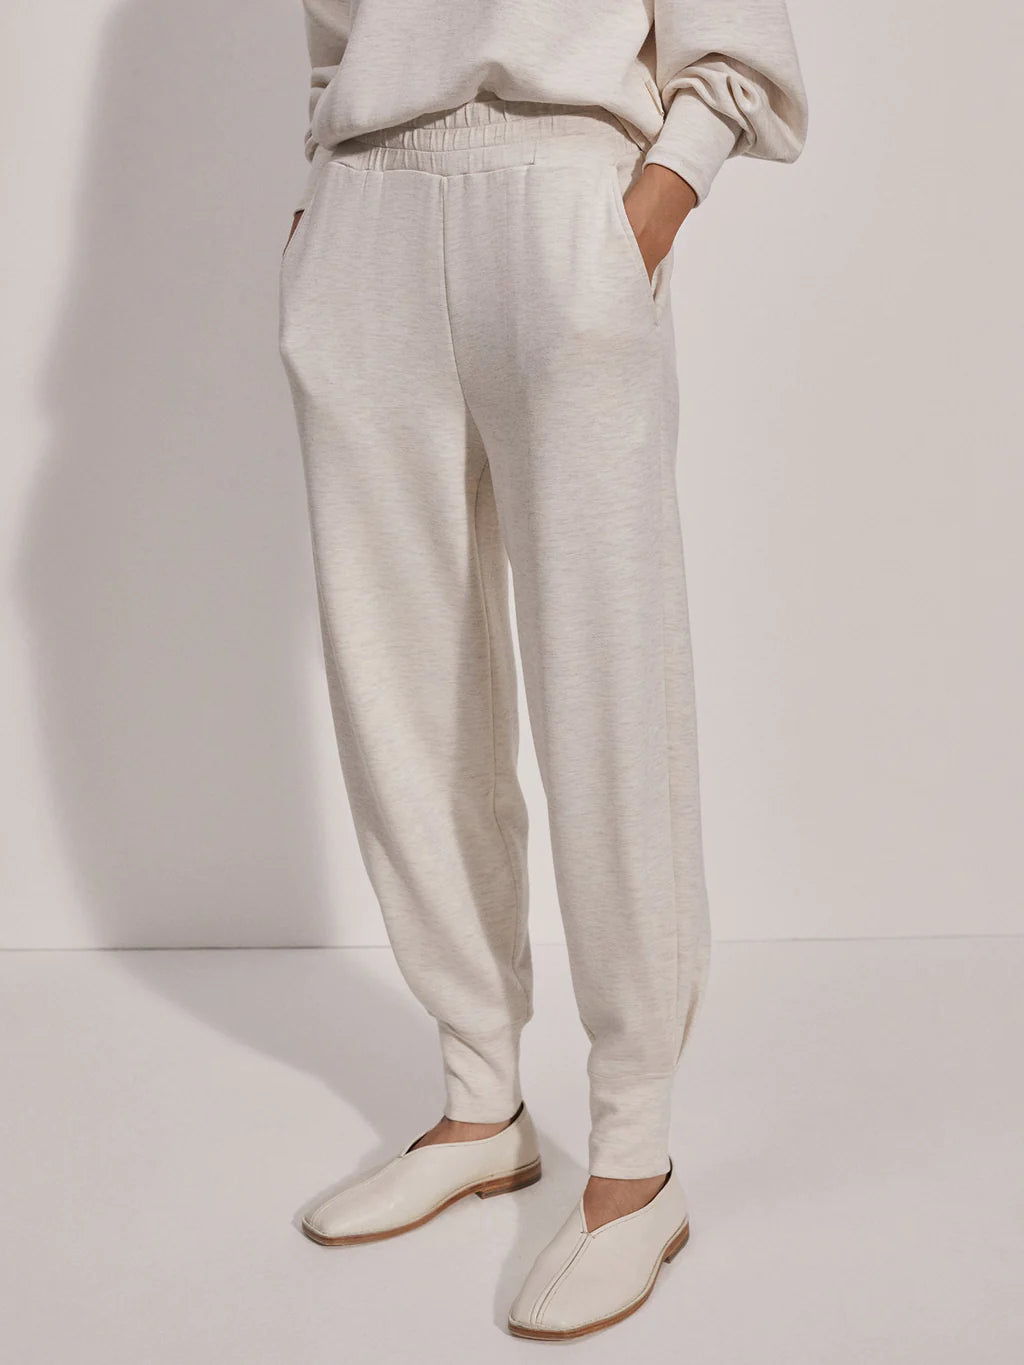 Relaxed Pant 25 by Varley